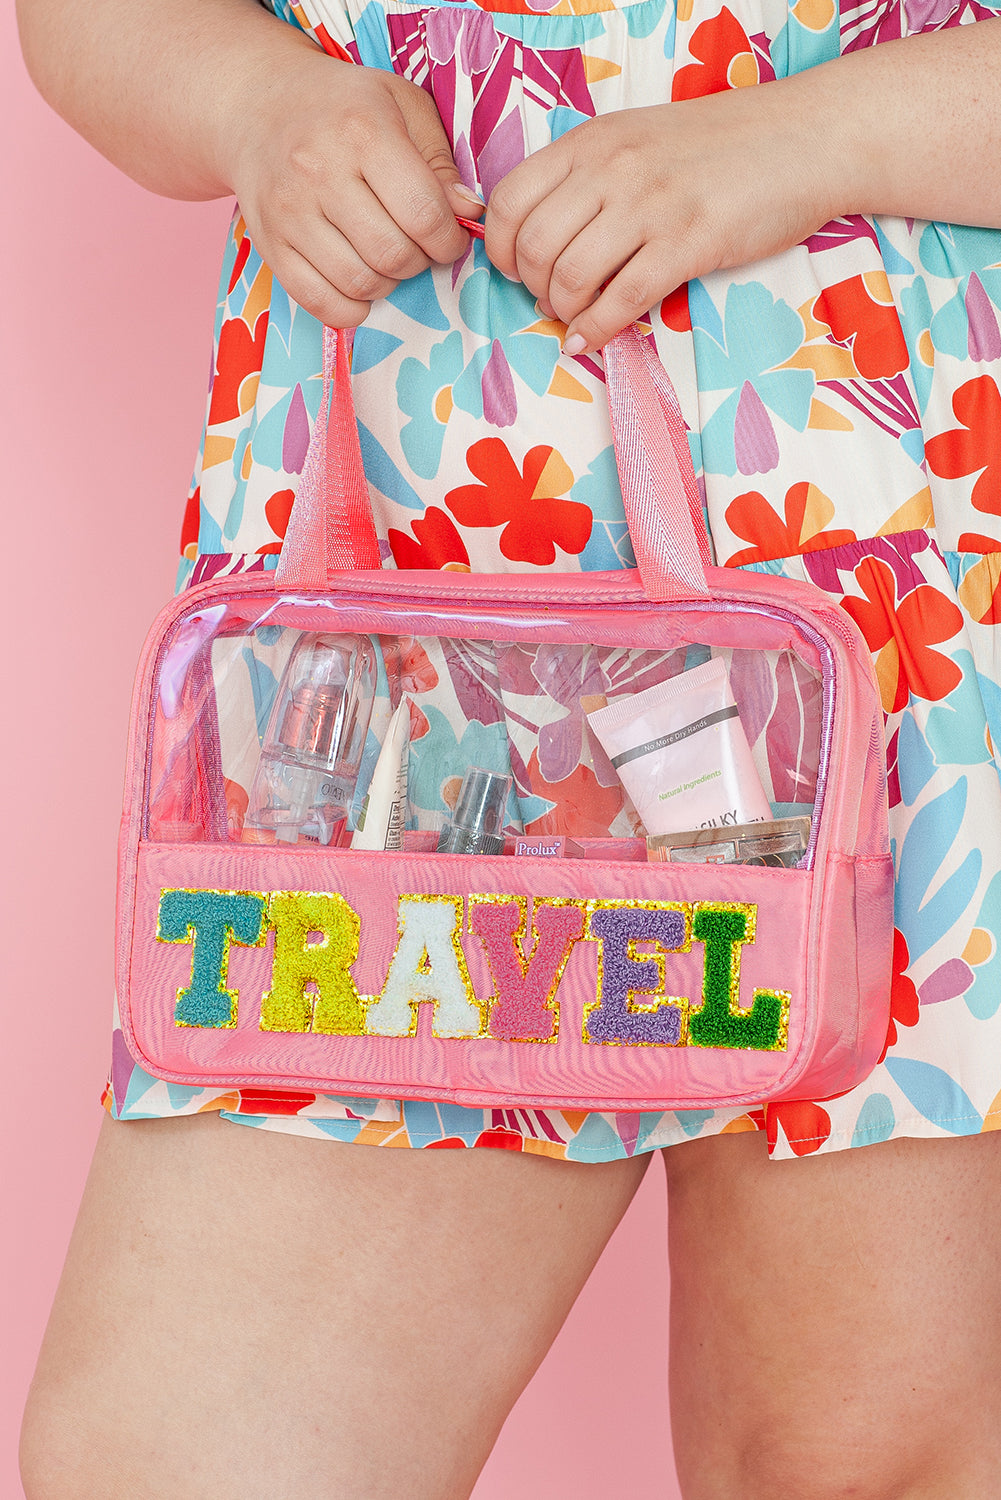 a woman is holding a pink travel bag